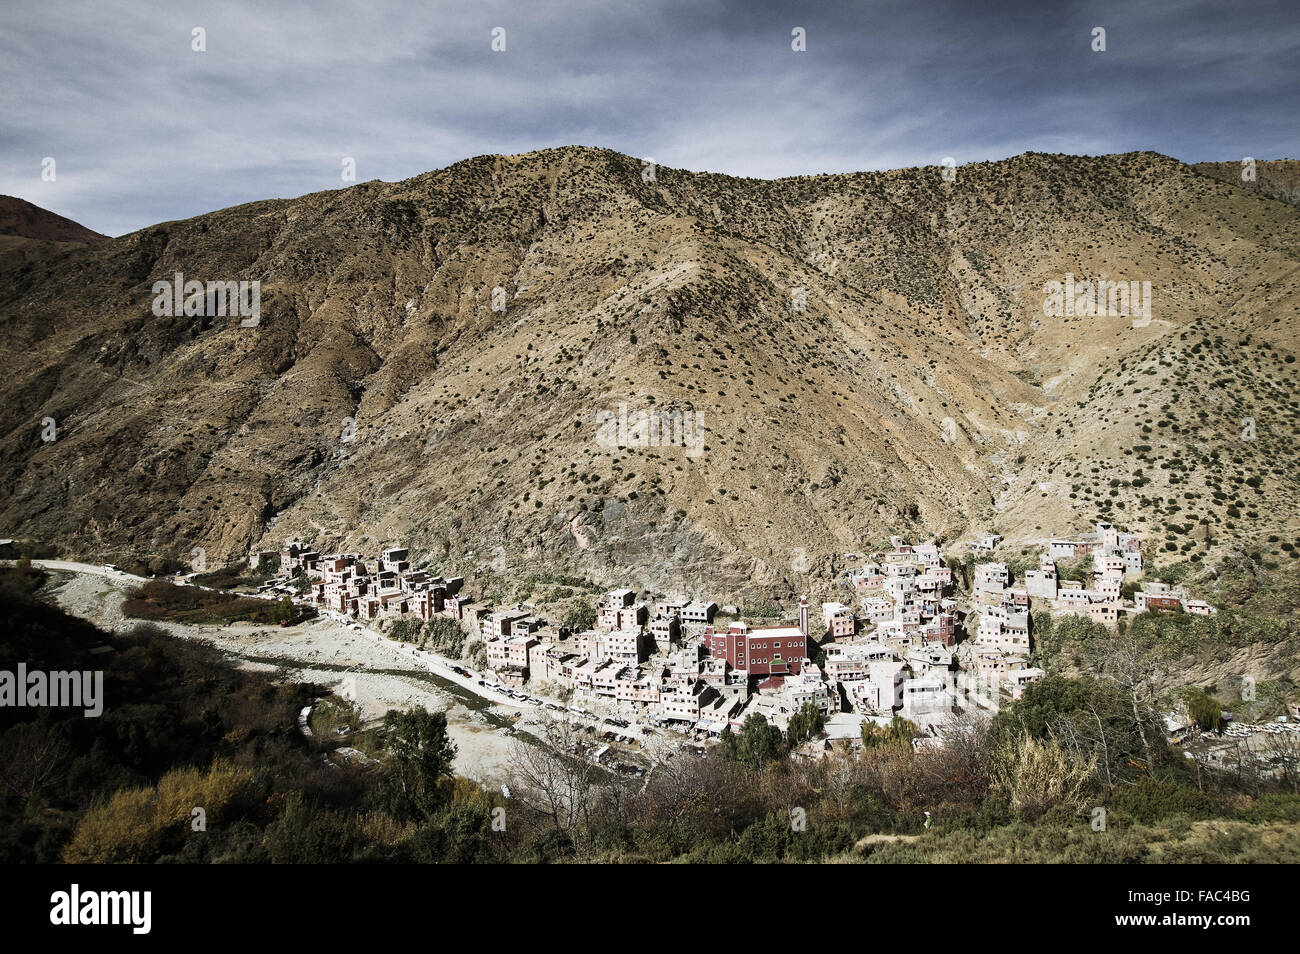 Village of Setti Fatma nestled on the hillsides of Ourika Valley - High Atlas mountains, Morocco Stock Photo